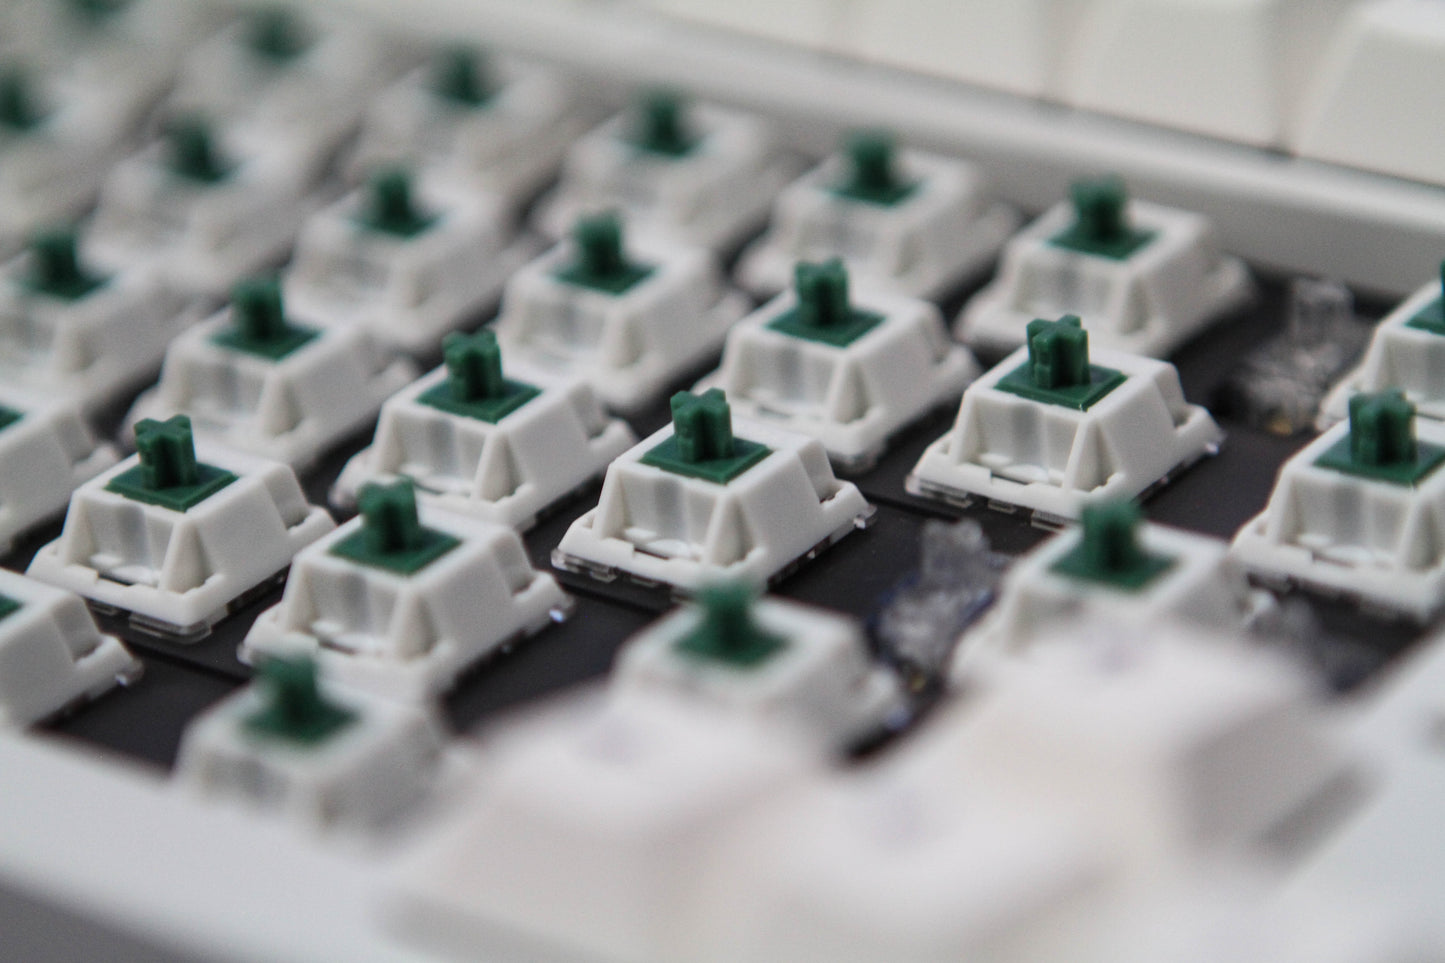 Close-up shot of BBN Linear switches in the central area of a keyboard with keycaps removed